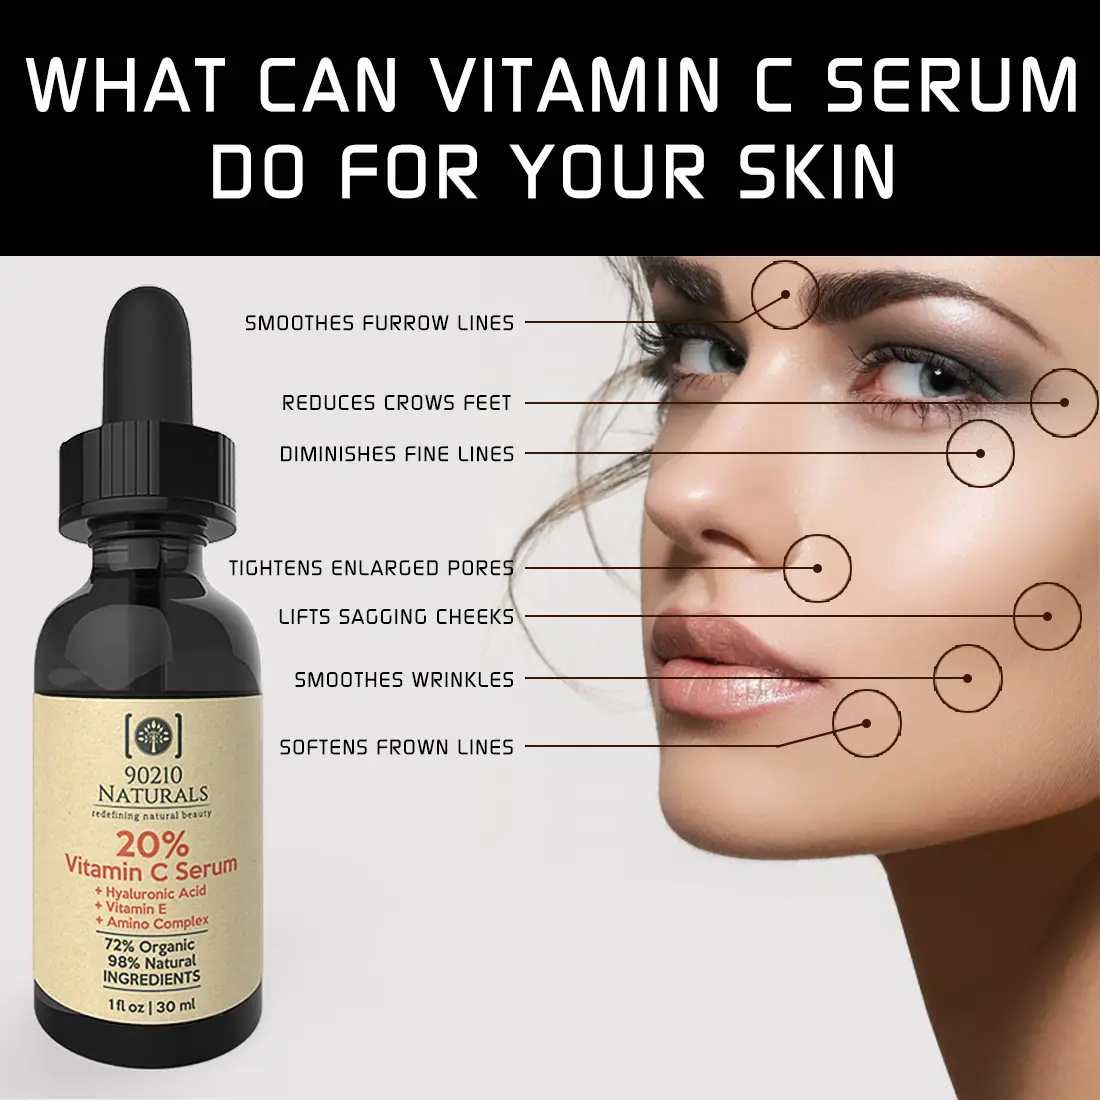 90210 Naturals Releases Their Hot New Vitamin C Serum For The Holidays